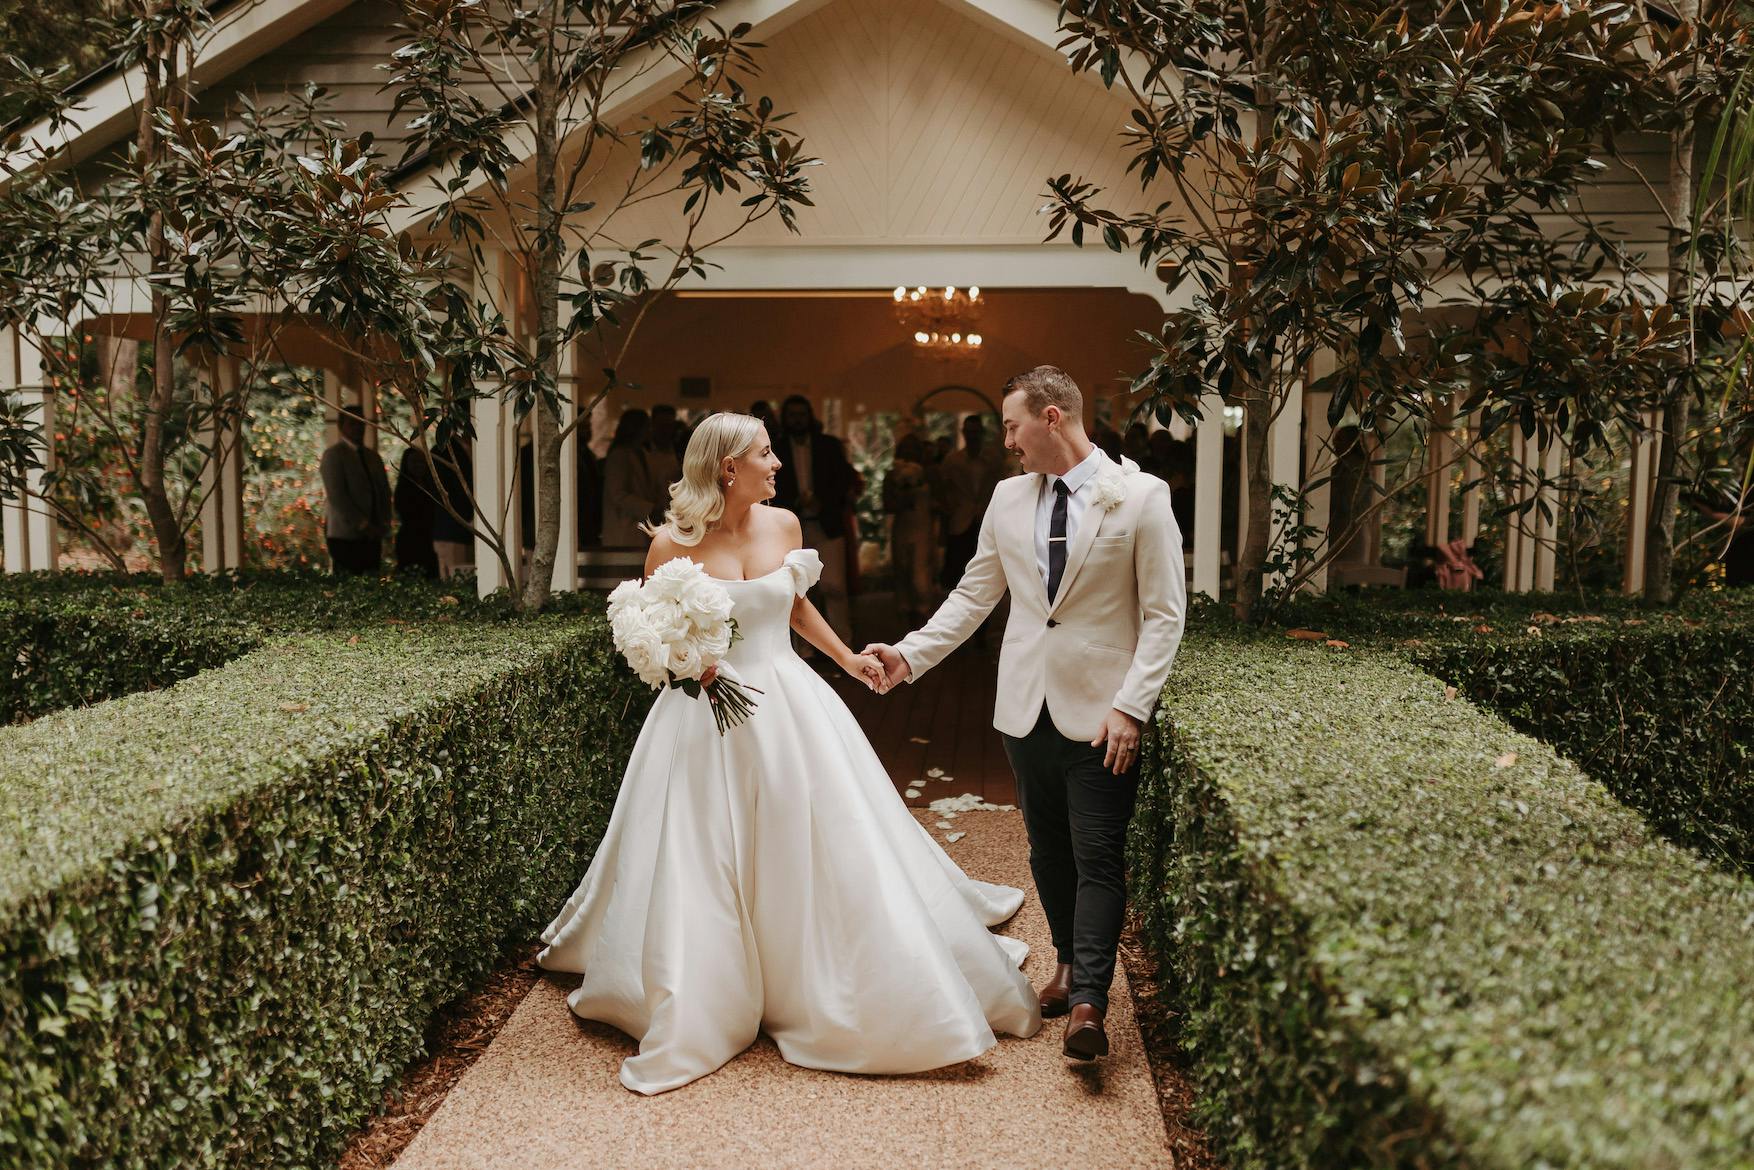 A newlywed couple walks hand in hand down a path lined with neatly trimmed hedges. The bride wears an off-the-shoulder white gown and holds a bouquet of white flowers, while the groom wears a light-colored suit with a tie. They are in front of a well-lit chapel.